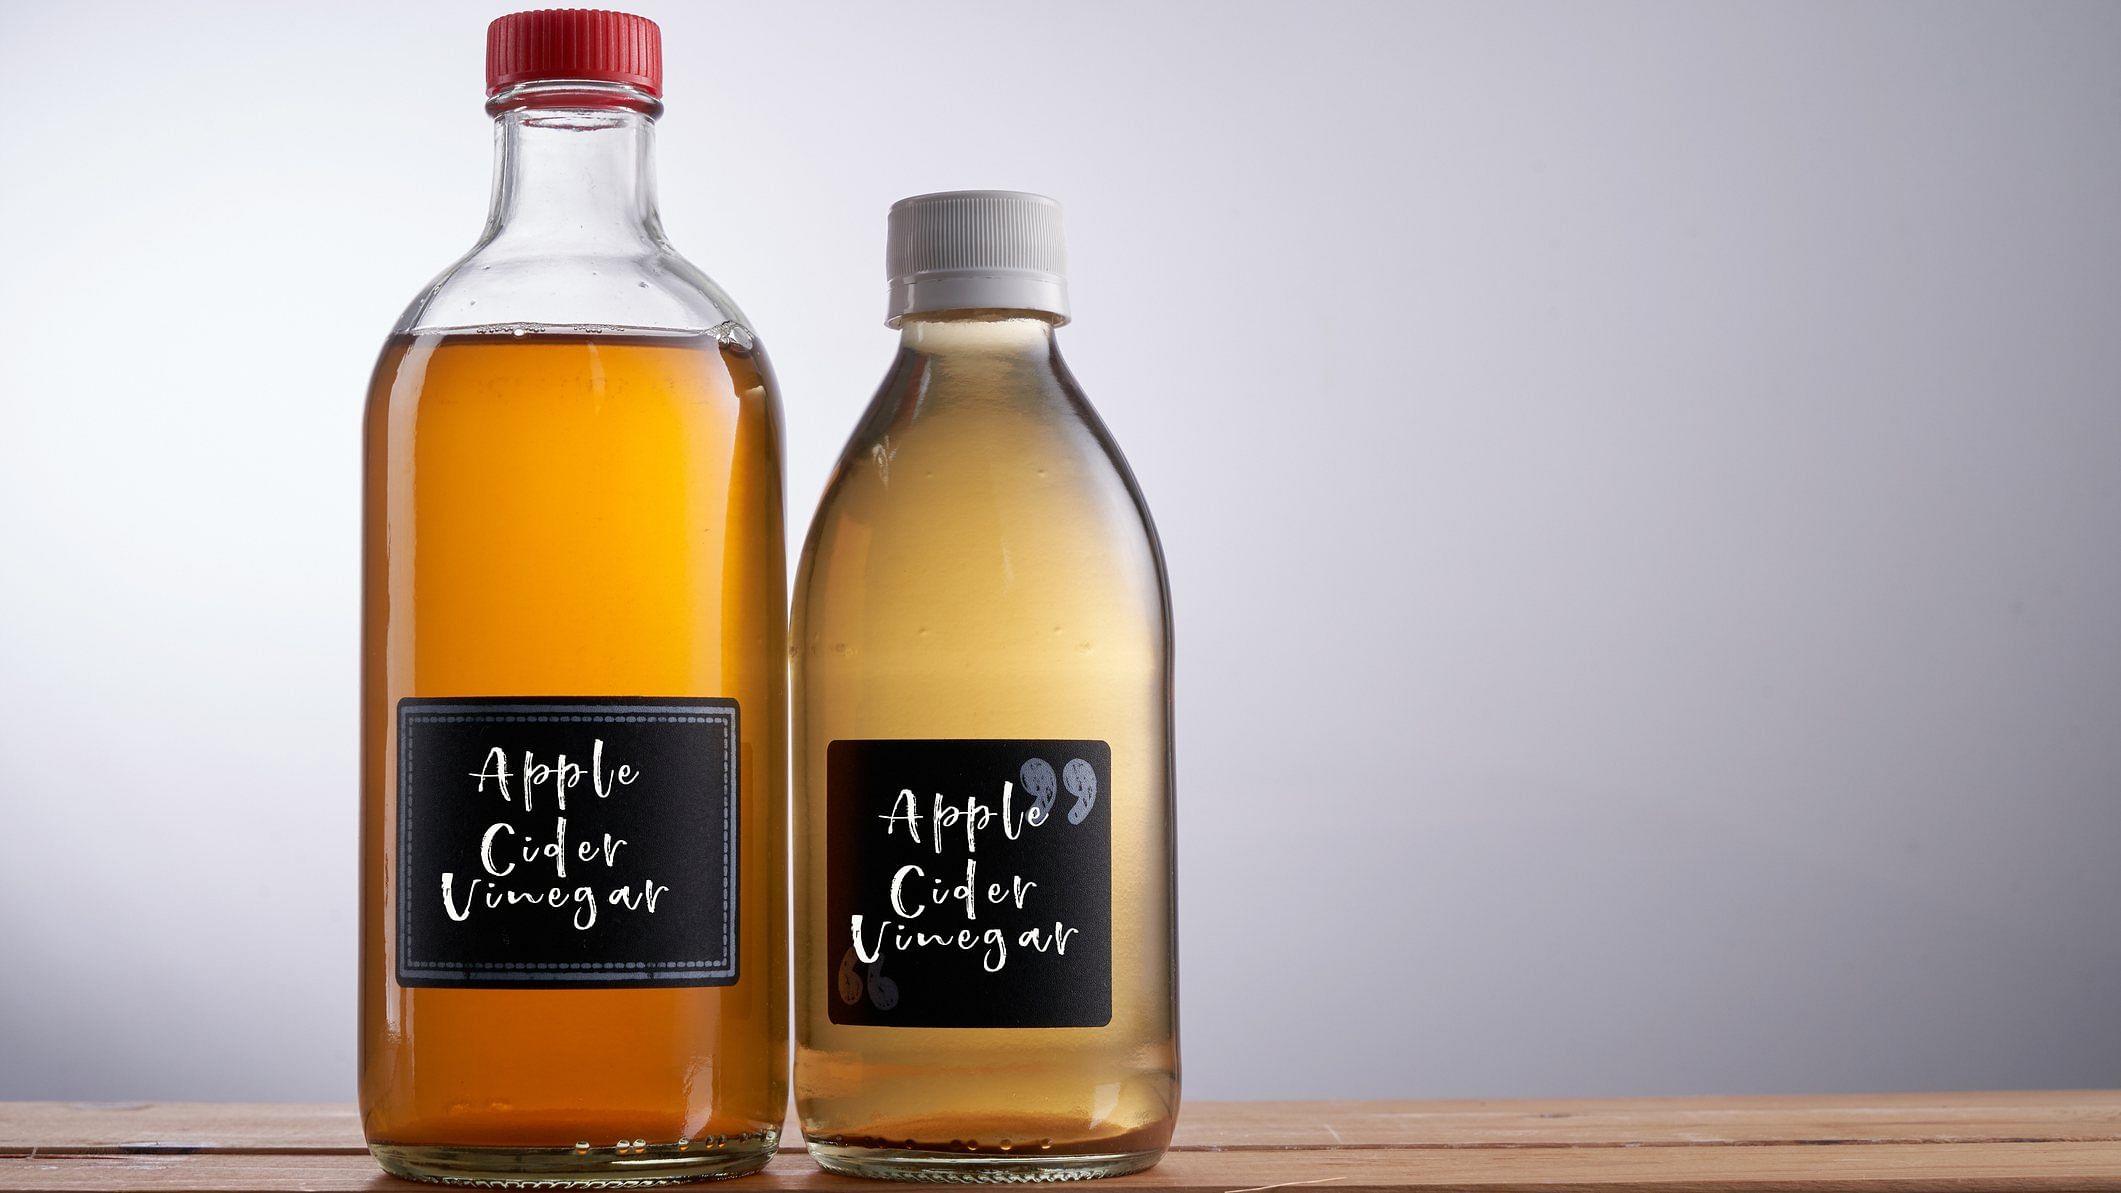 Because of the lack of research about apple cider vinegar, there are no official dosage suggestions to date. Credit: iStock Photo